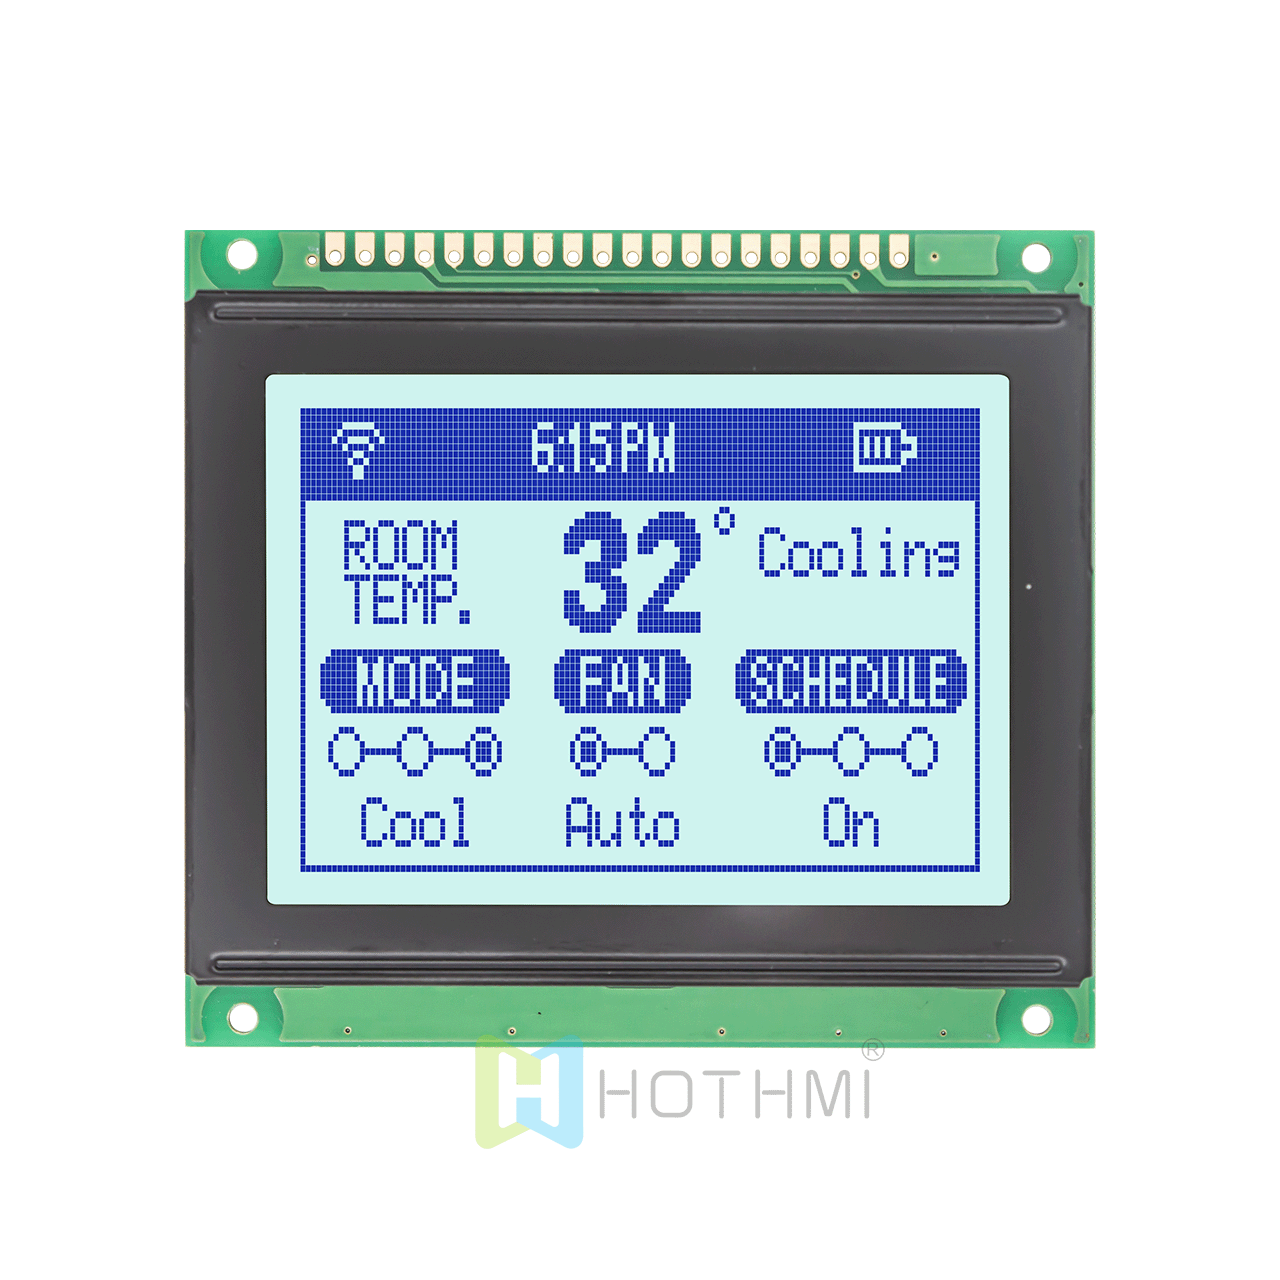 3" 128x64 LCD display | Graphic dot matrix display | Compatible with KS0108 | Blue text on gray background | Arduino